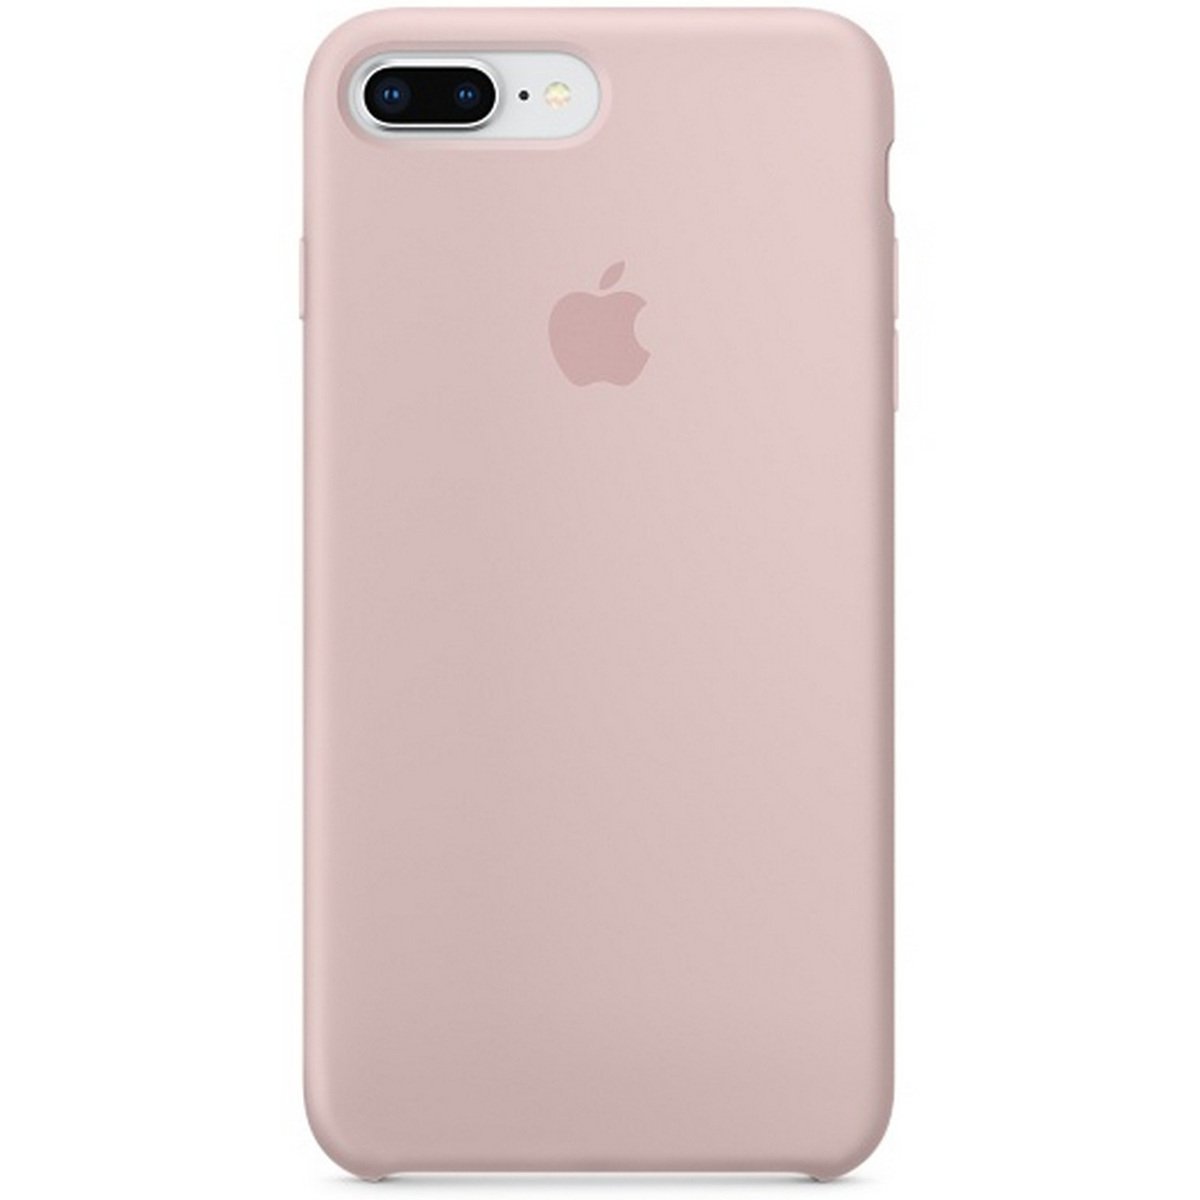 Apple iPhone 8 Plus Silicone Case Pink Sand